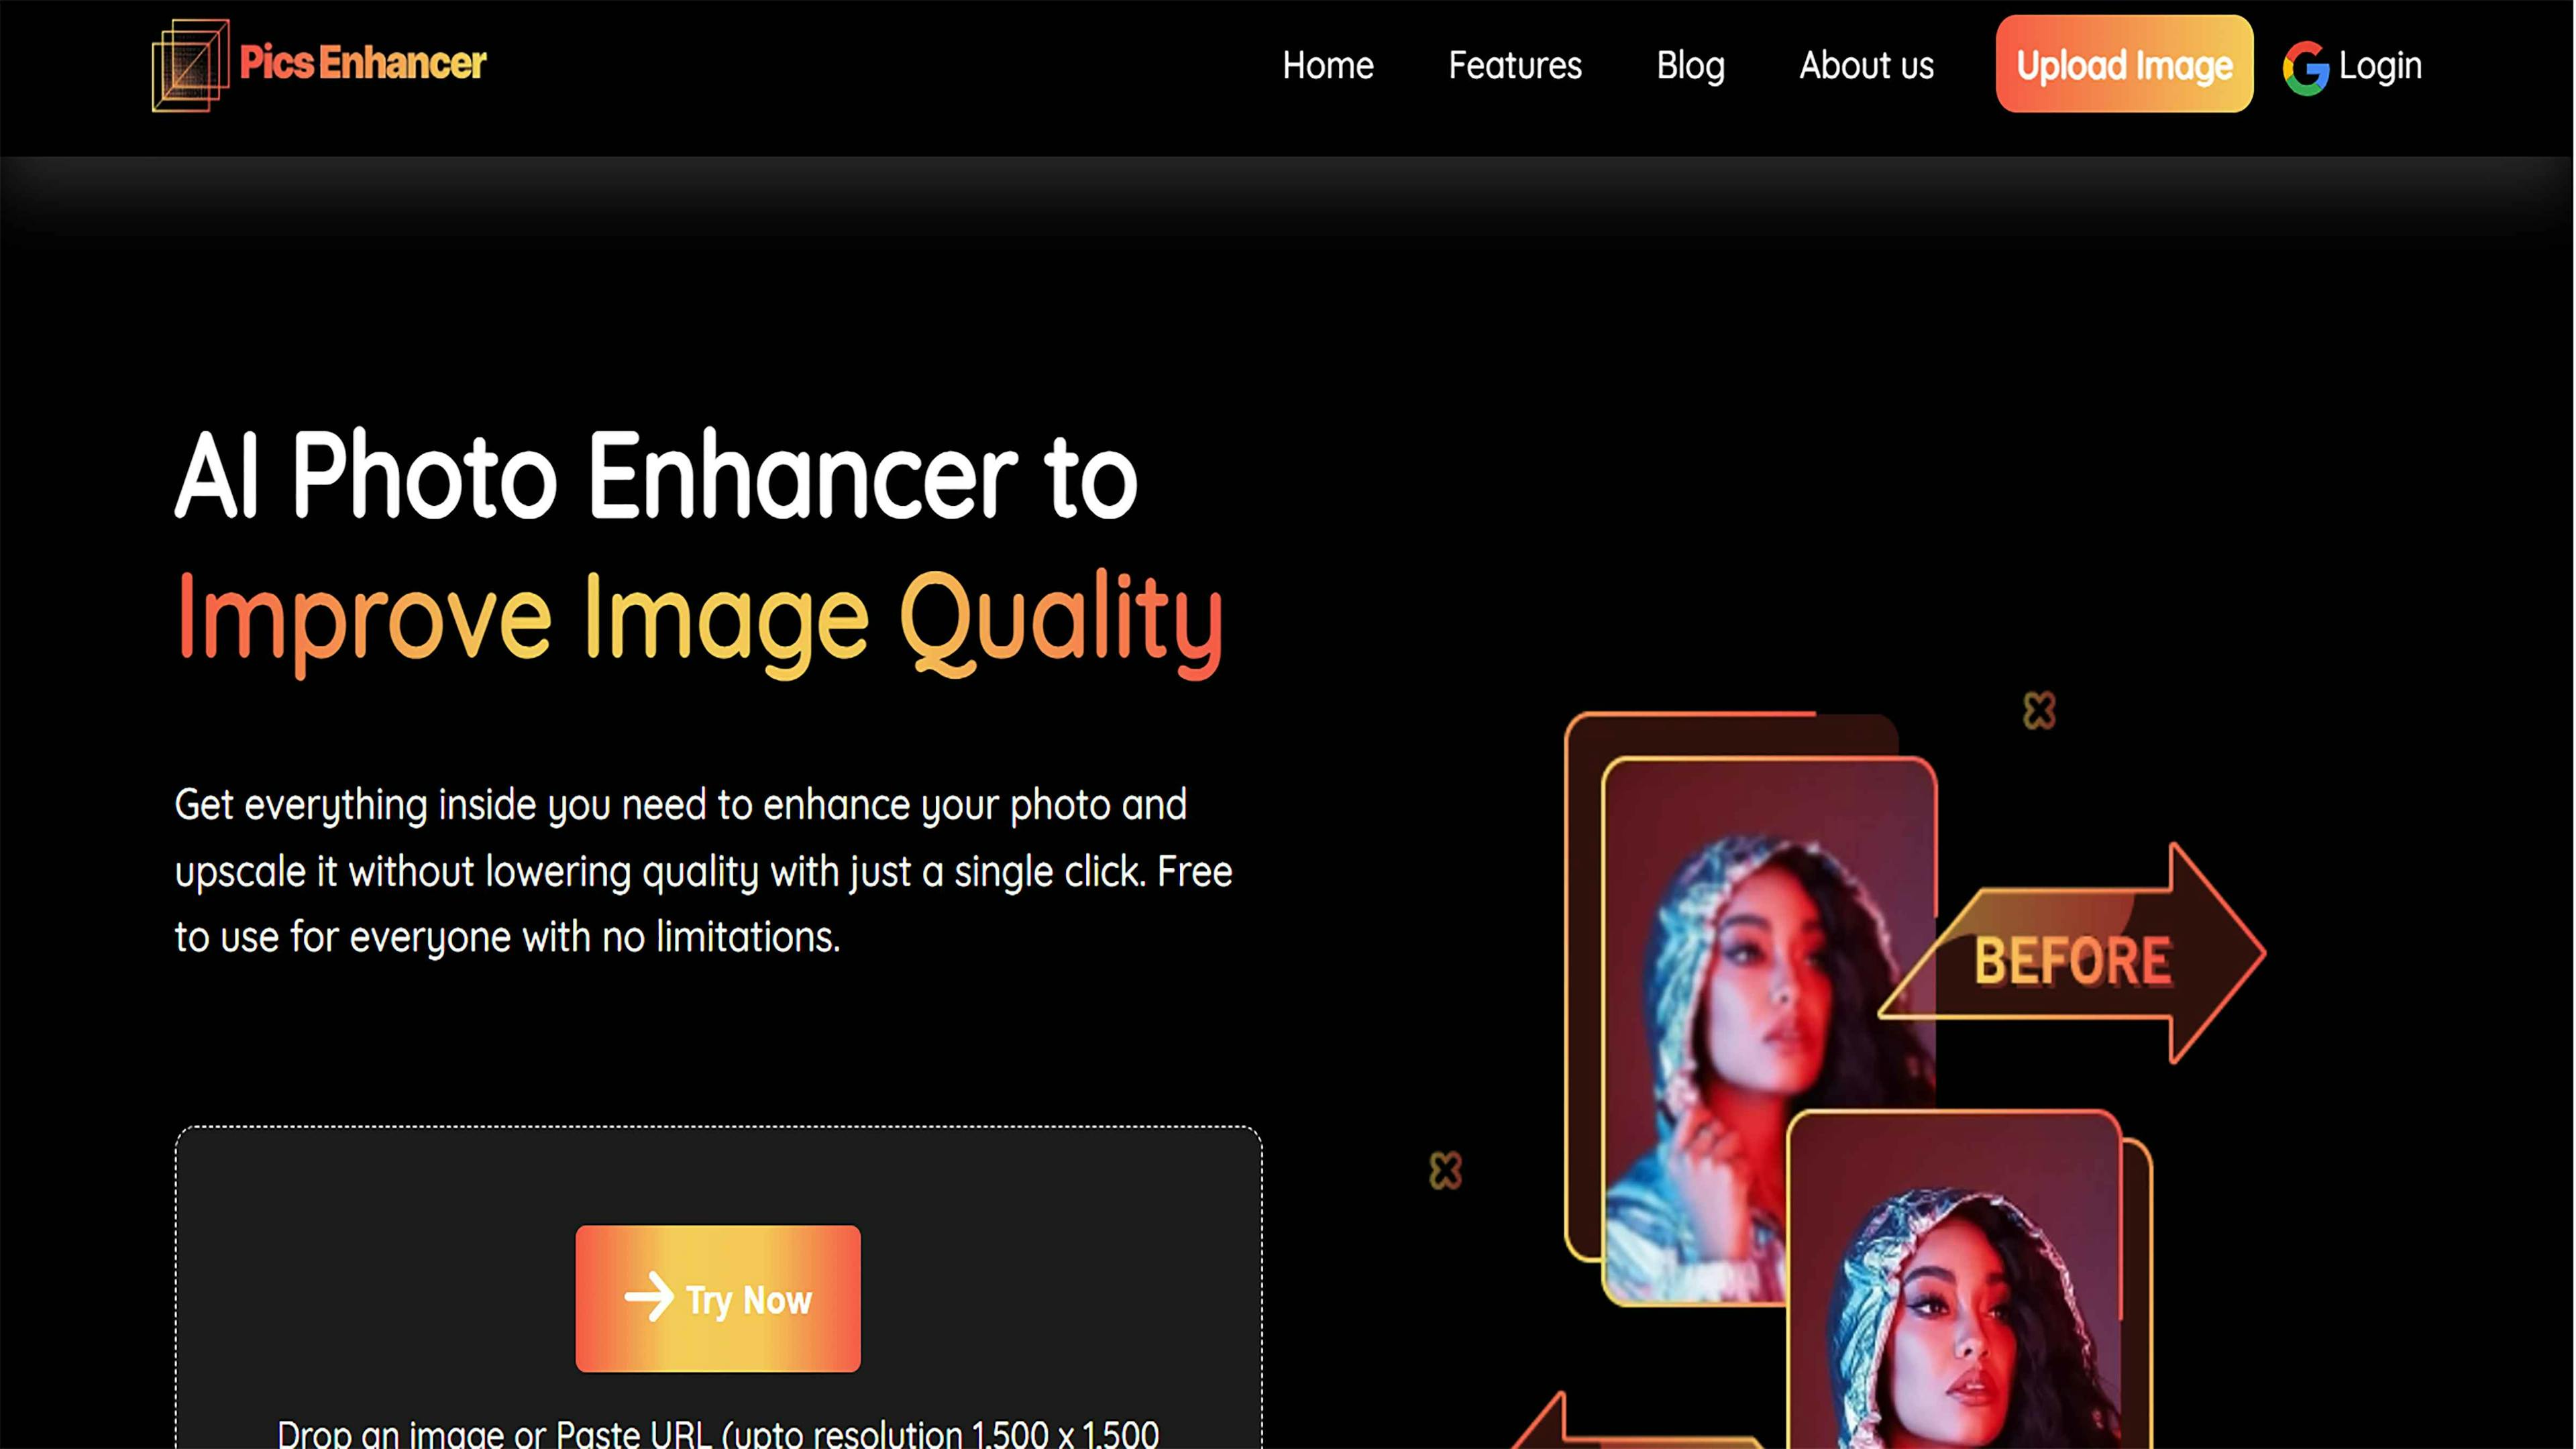 Transform images with a single click